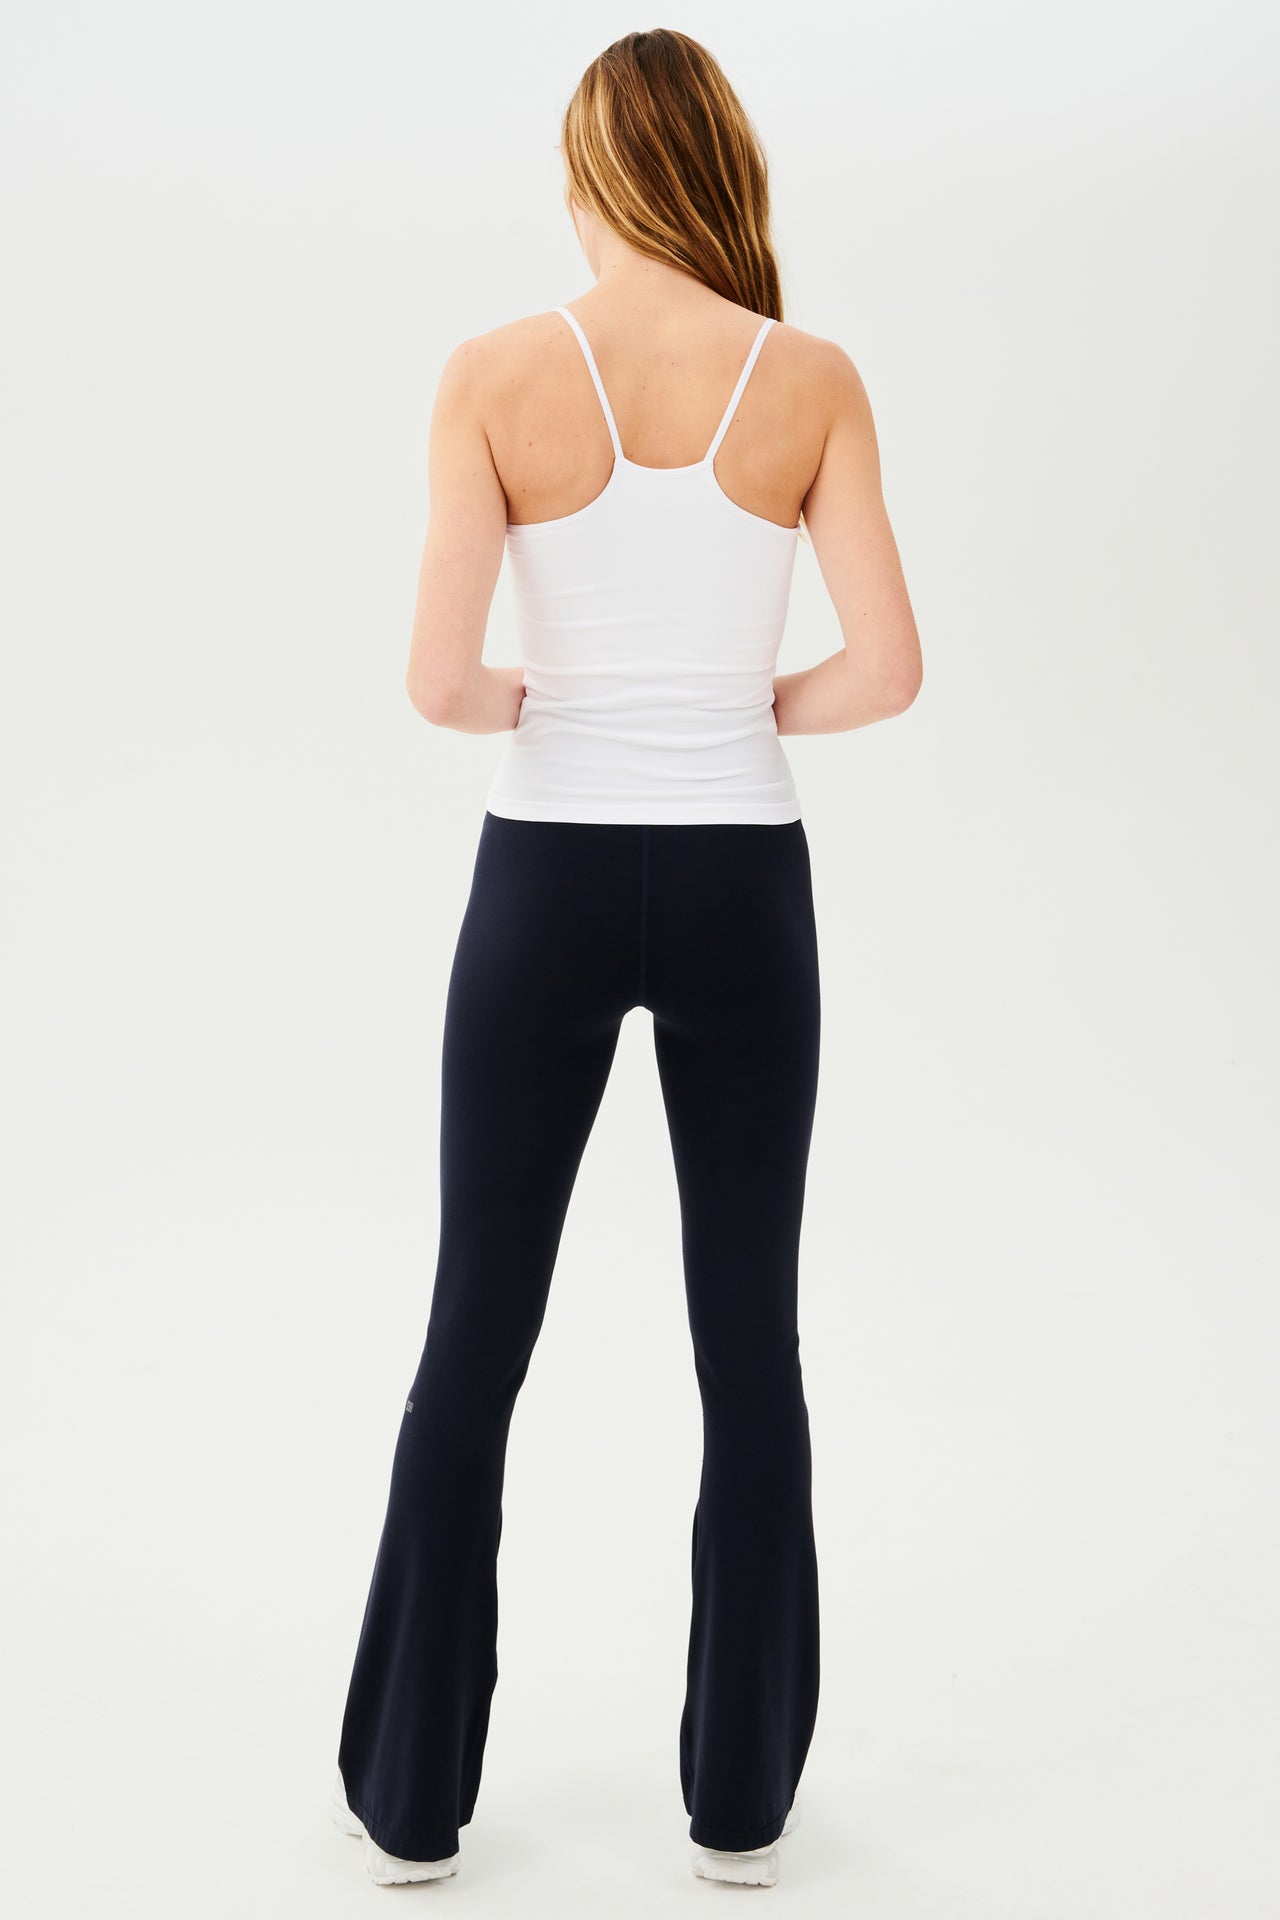 The back view of a woman wearing a white tank top and black leggings made from SPLITS59's Raquel High Waist Airweight Flare - Indigo fabric.